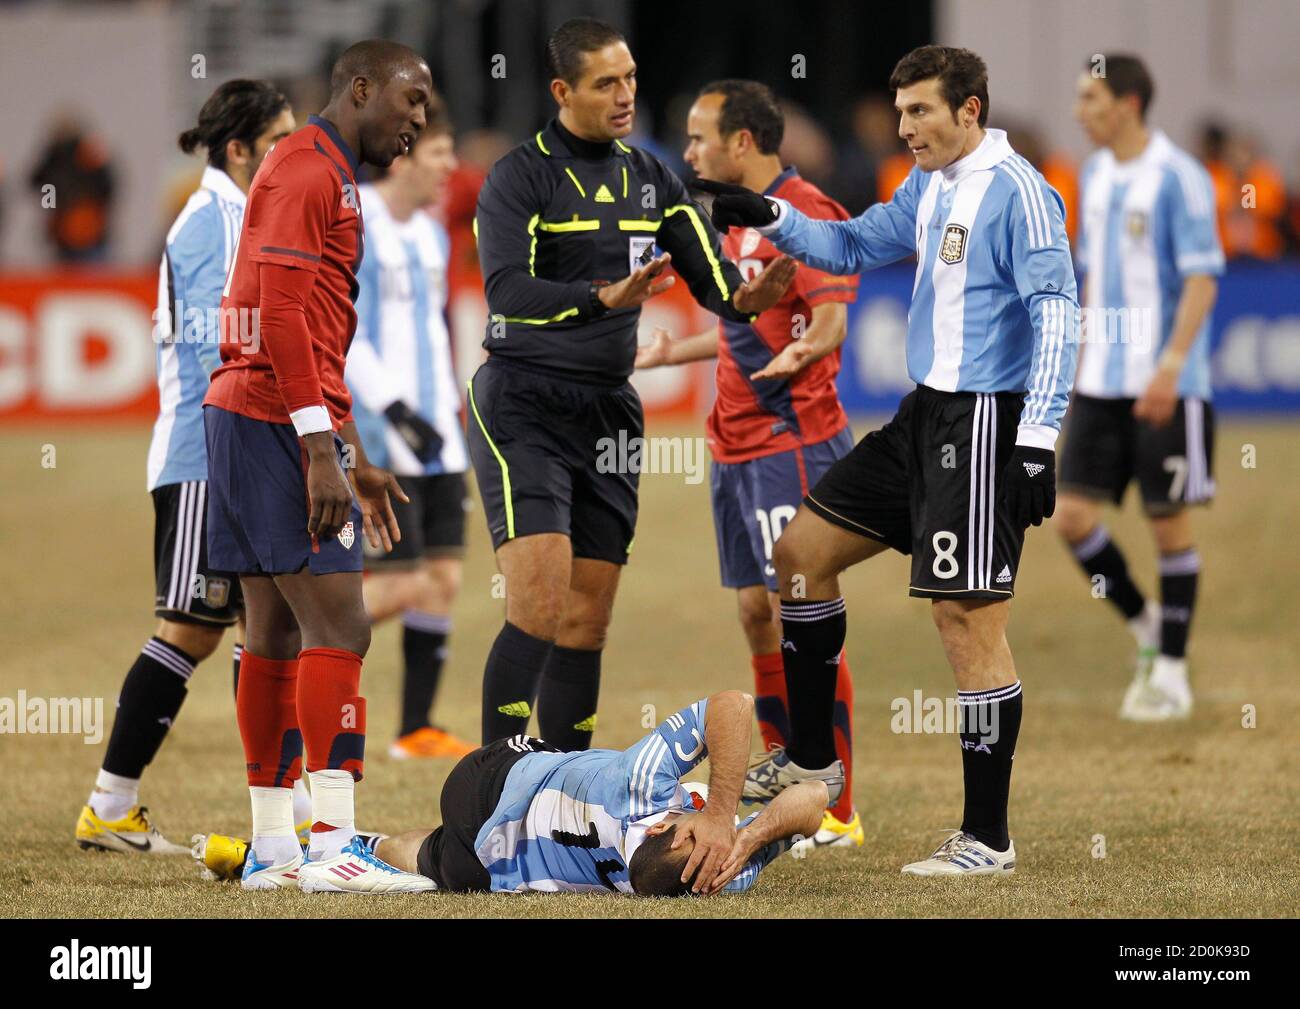 Argentina's Javier Mascherano lies on the ground as referee Roberto Garcia  Orozco of Mexico tries to keep Argentina's Javier Zanetti (R) from arguing  with Jozy Altidore (L) of the U.S., during their